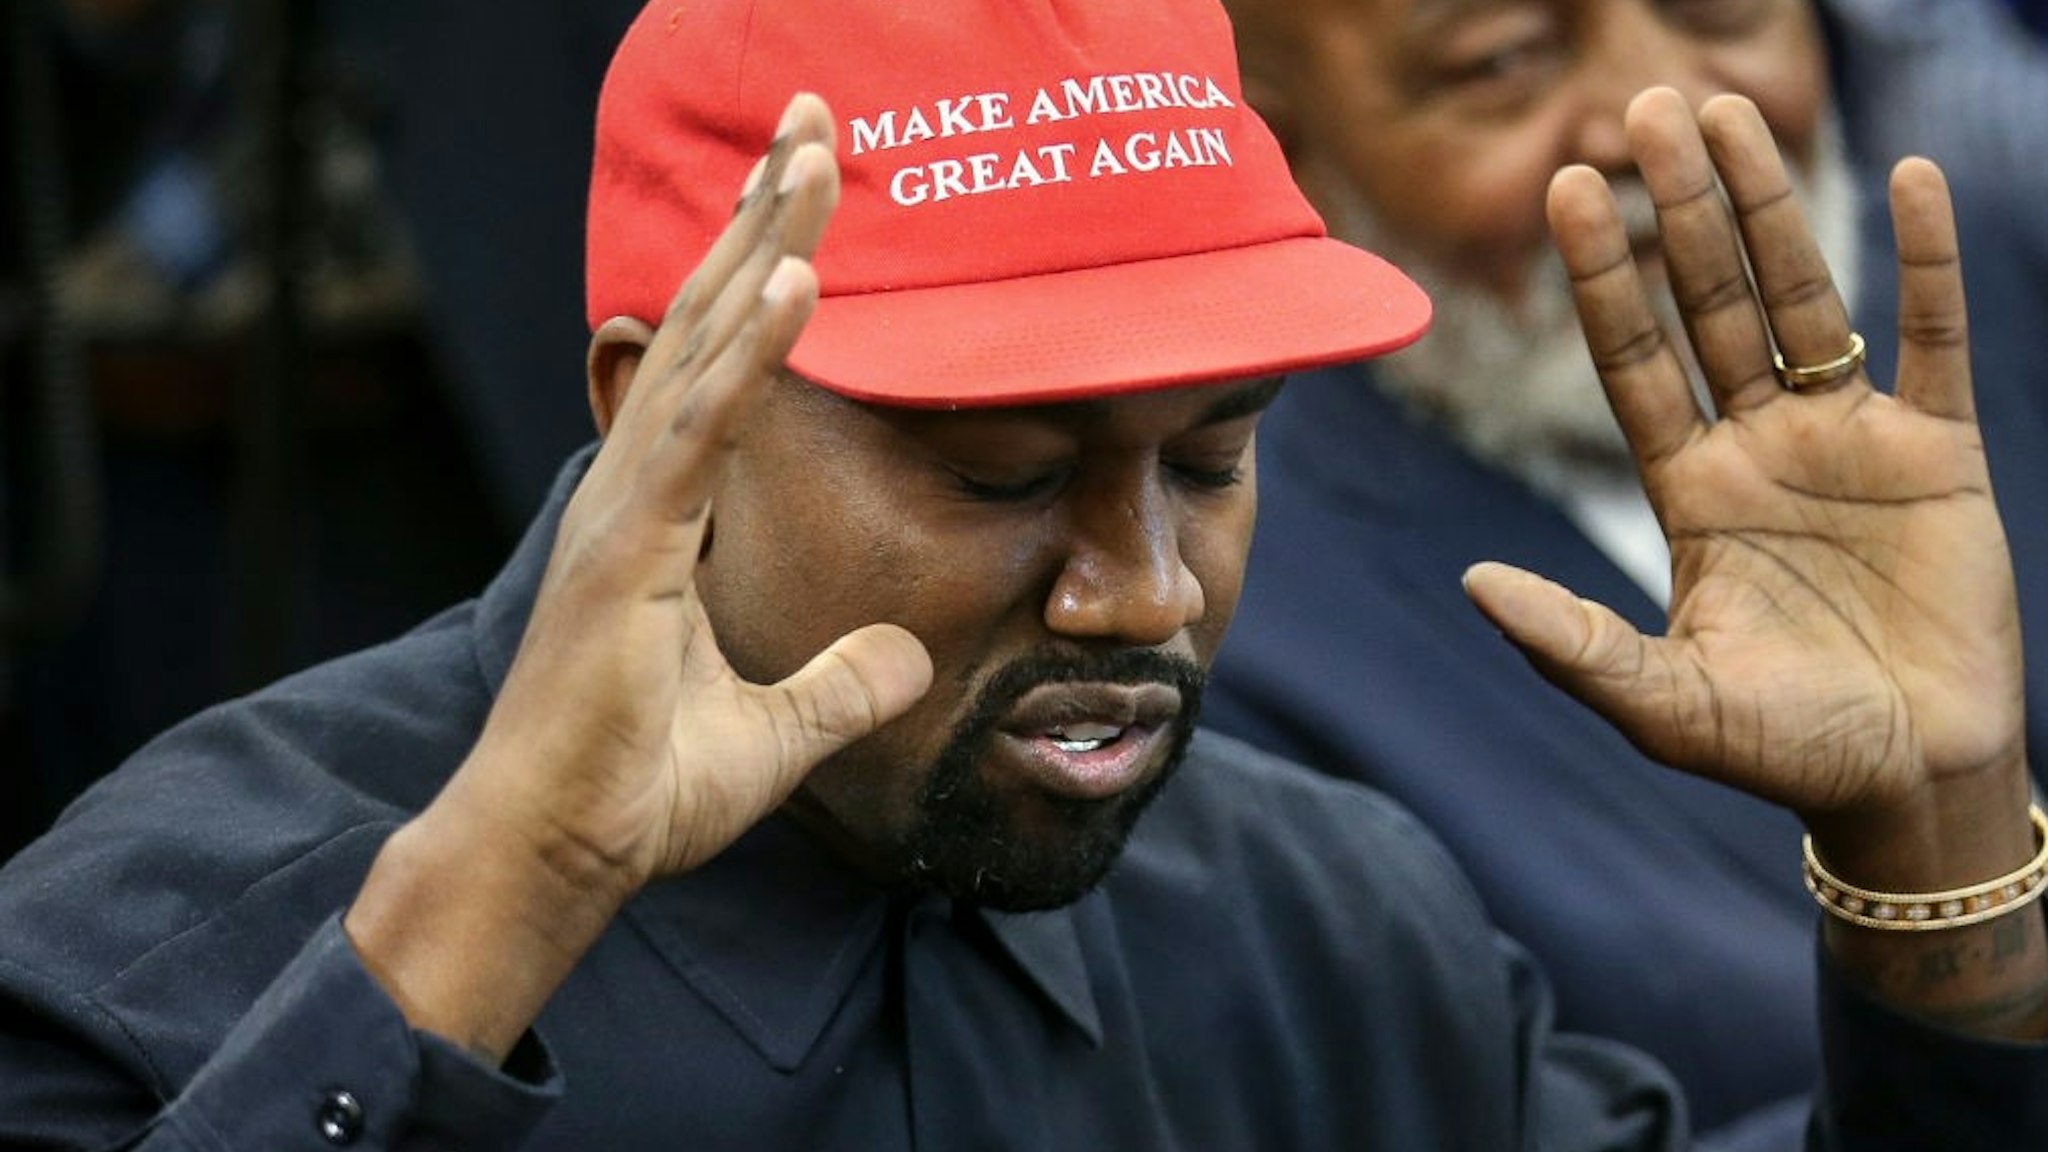 Rapper Kanye West speaks during a meeting with U.S. President Donald Trump in the Oval office of the White House on October 11, 2018 in Washington, DC. (Photo by Oliver Contreras - Pool/Getty Images)